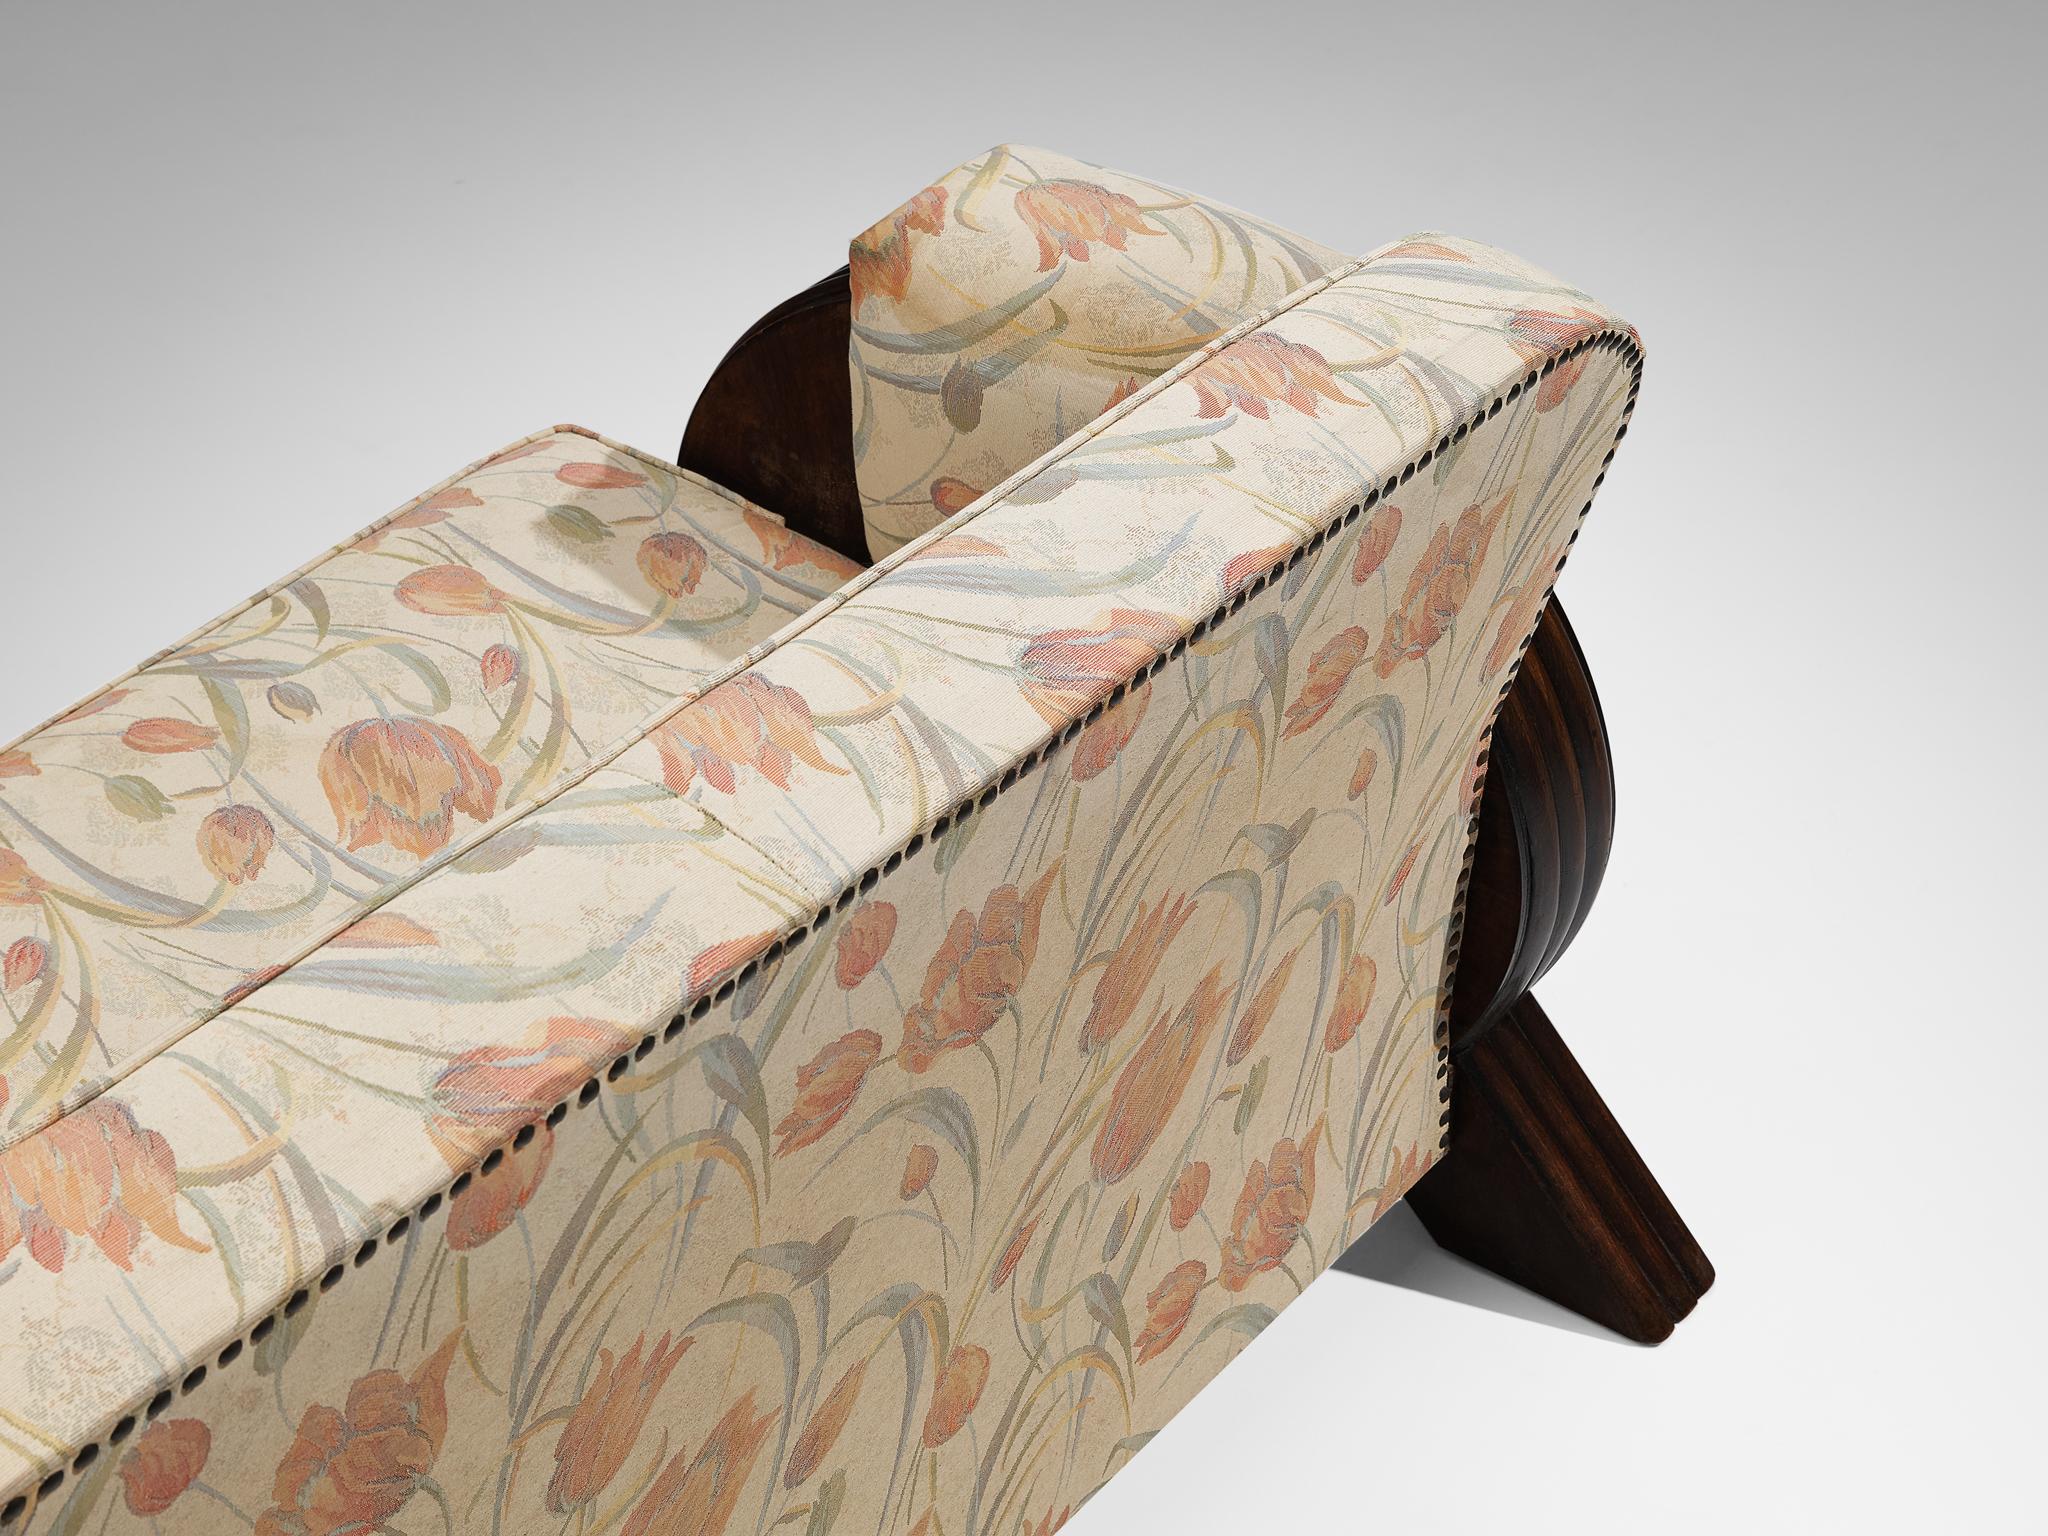 Italian Art Deco Sofa in Floral Upholstery and Wood For Sale 2